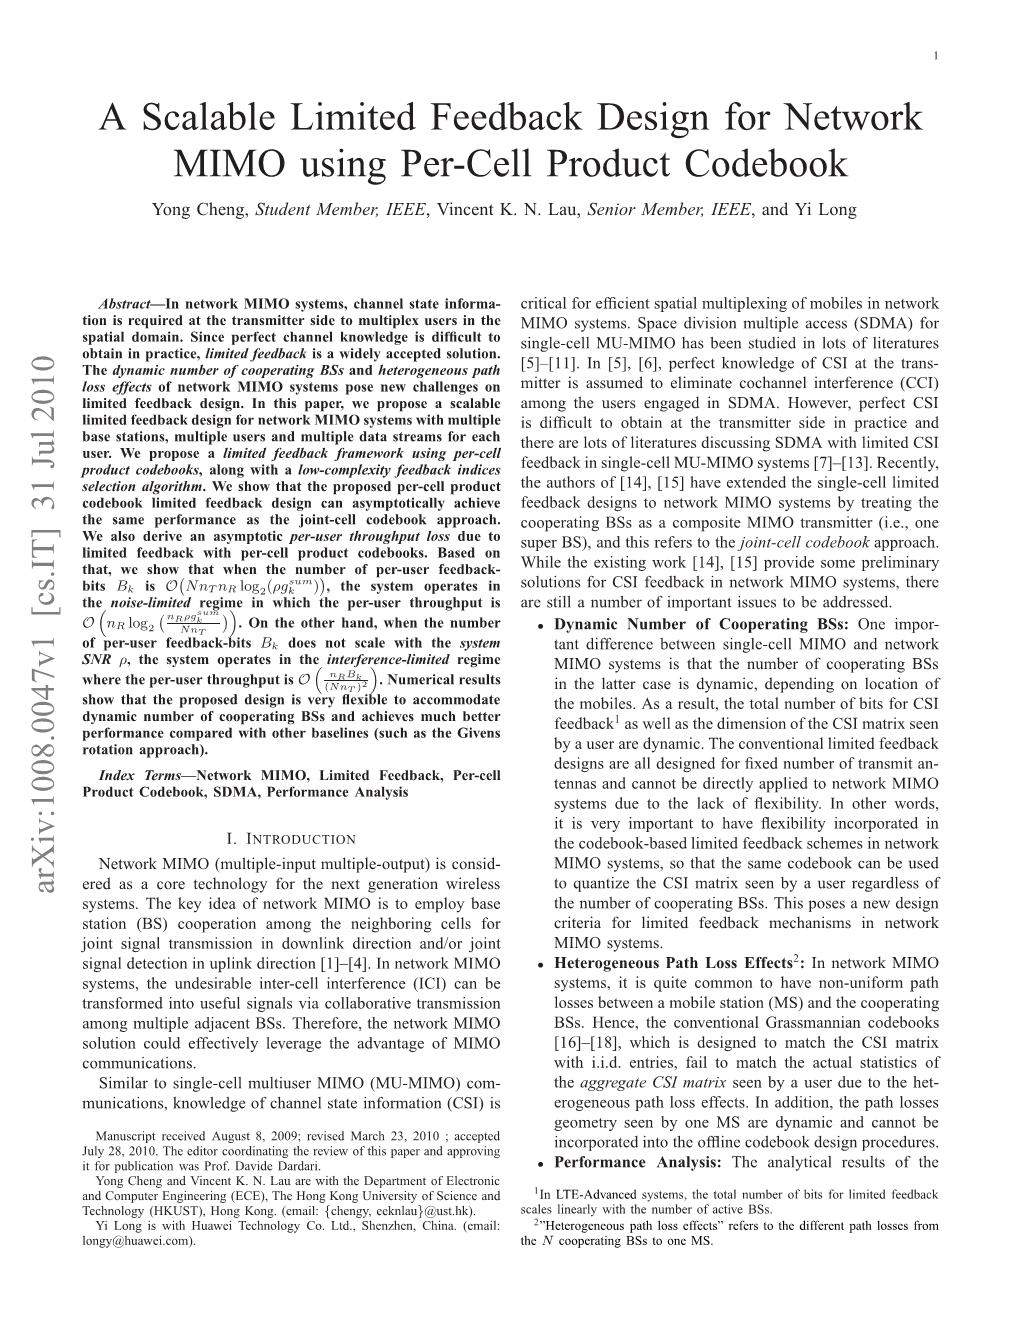 A Scalable Limited Feedback Design for Network MIMO Using Per-Cell